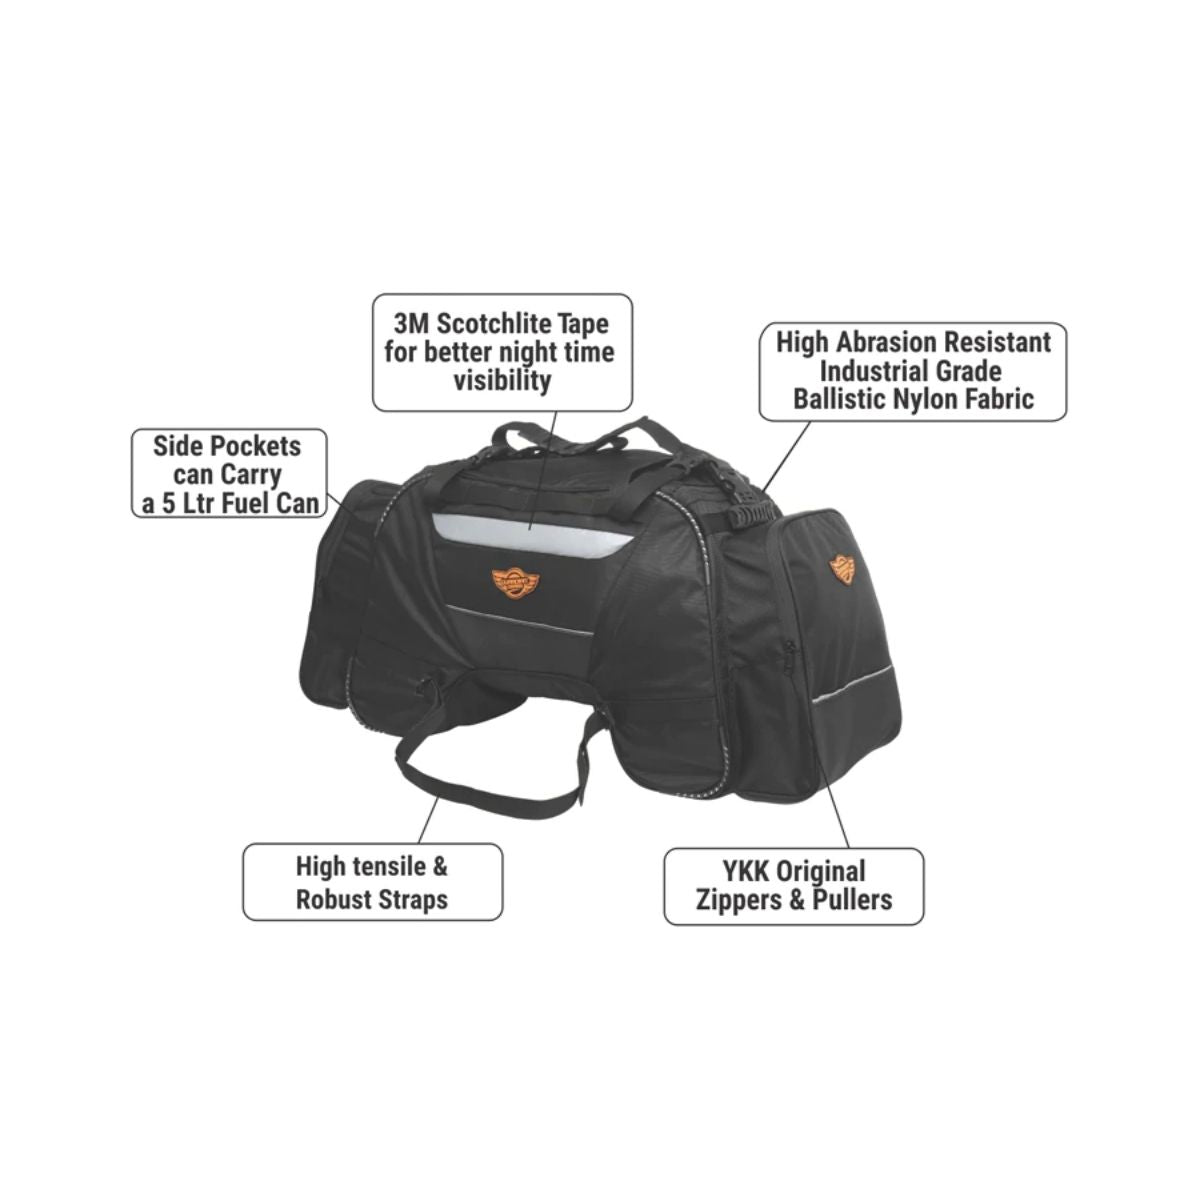 Rhino 70L Tail Bag with Rain Cover and Dry Bag - Black - 12